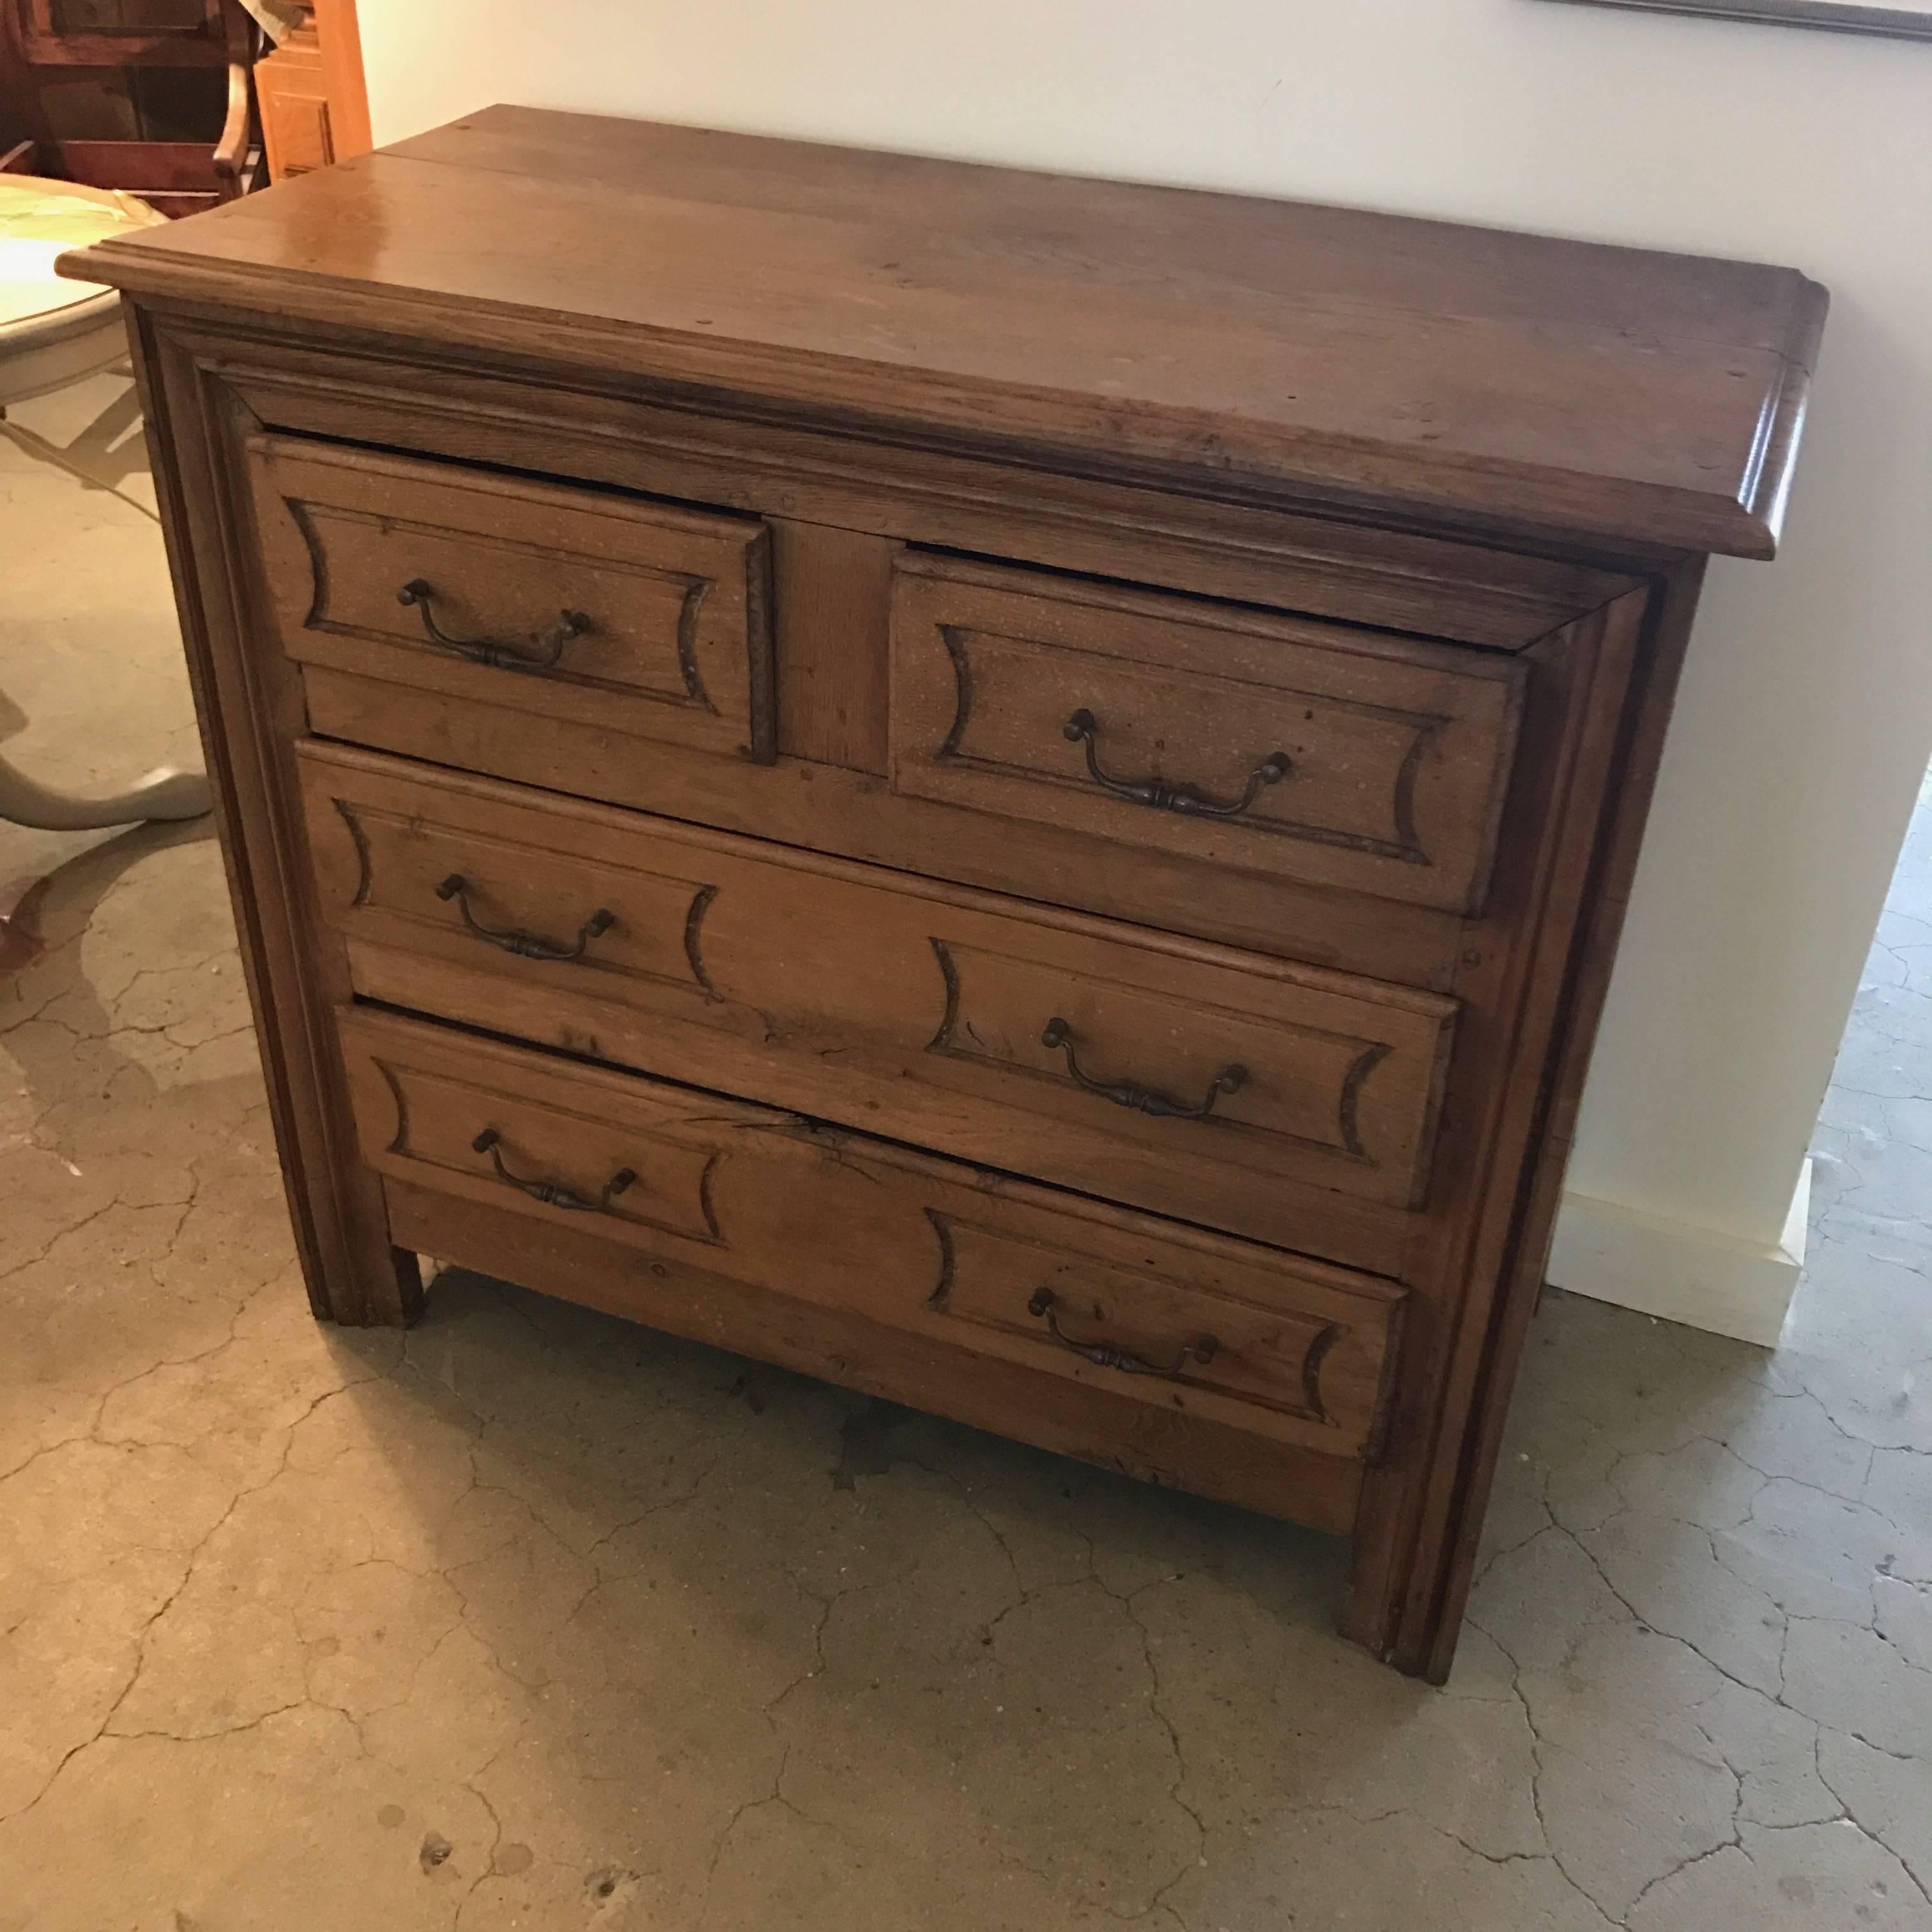 19th century French four-drawer commode.